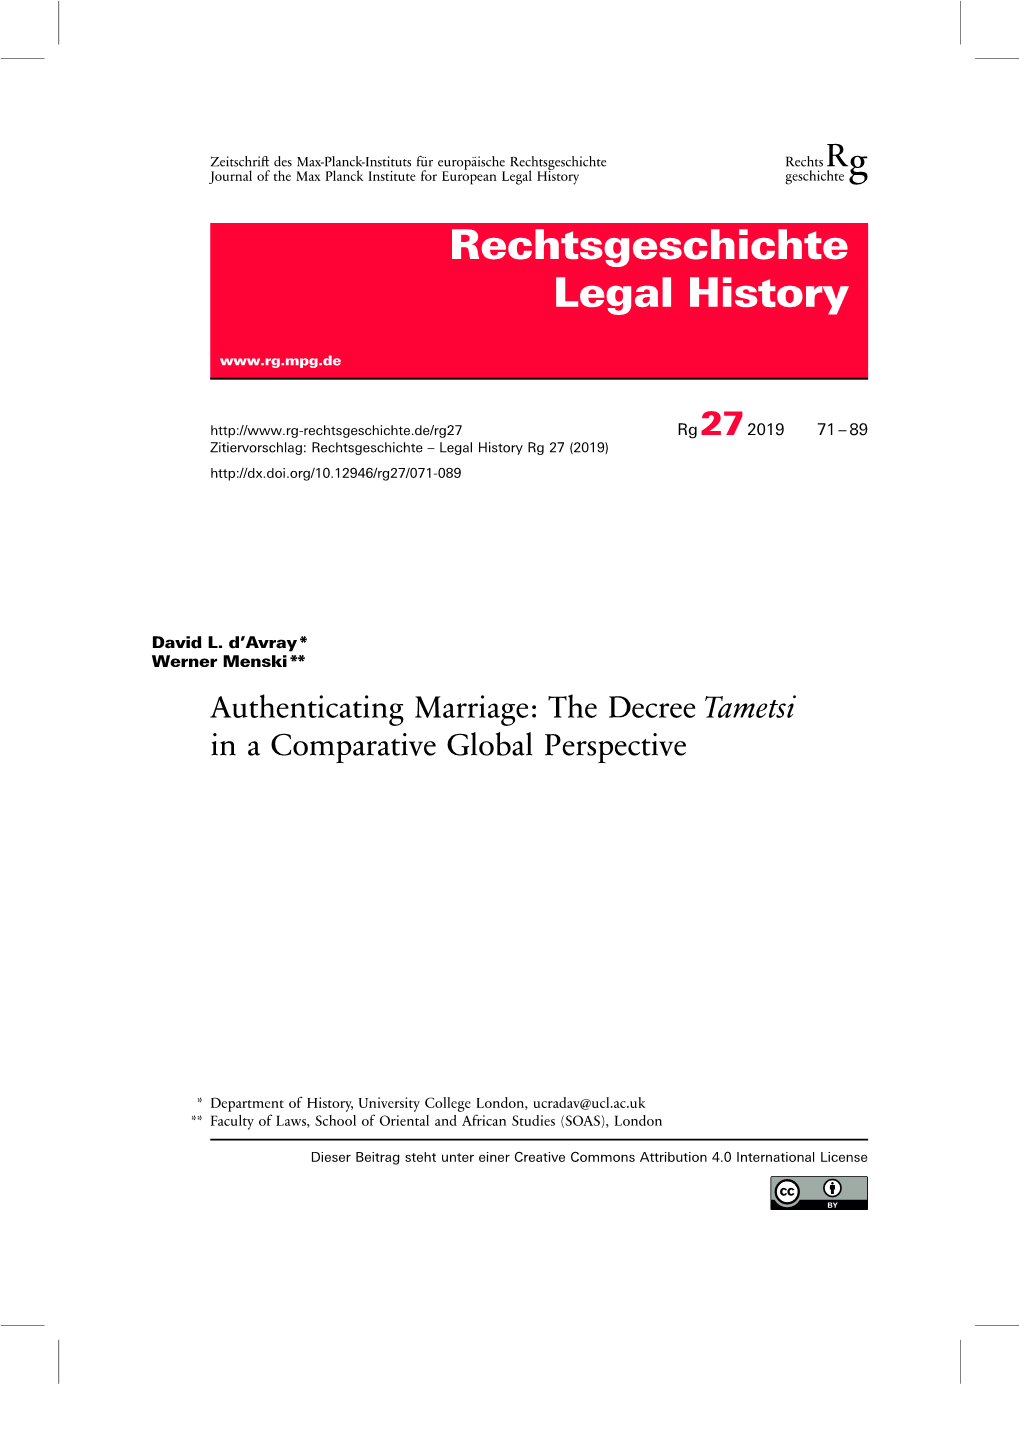 Authenticating Marriage: the Decree Tametsi in a Comparative Global Perspective